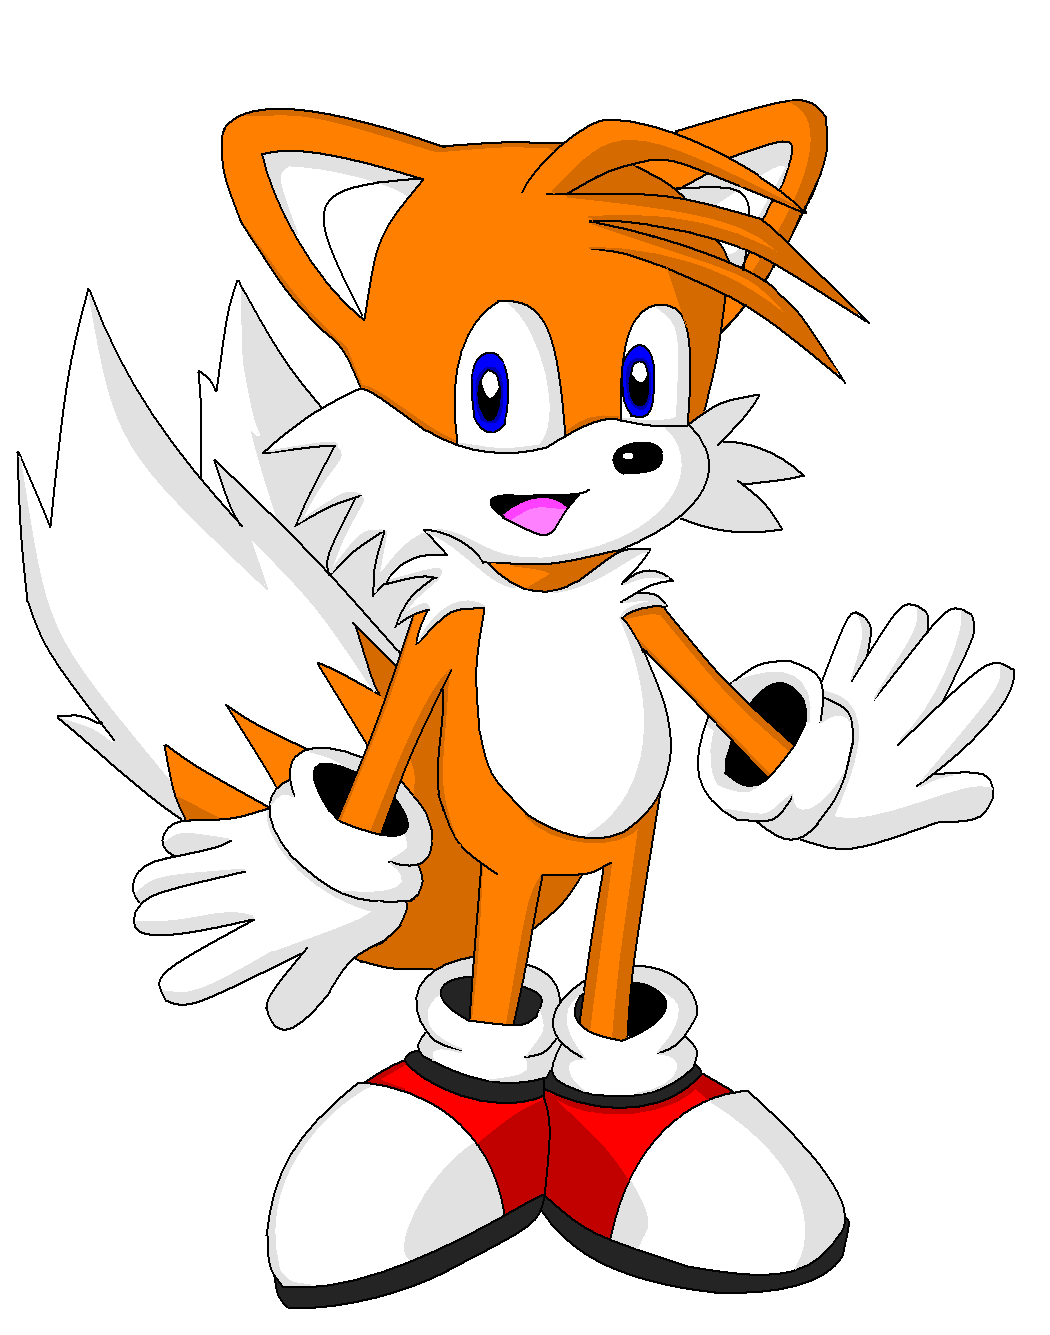 Tails by Alisa